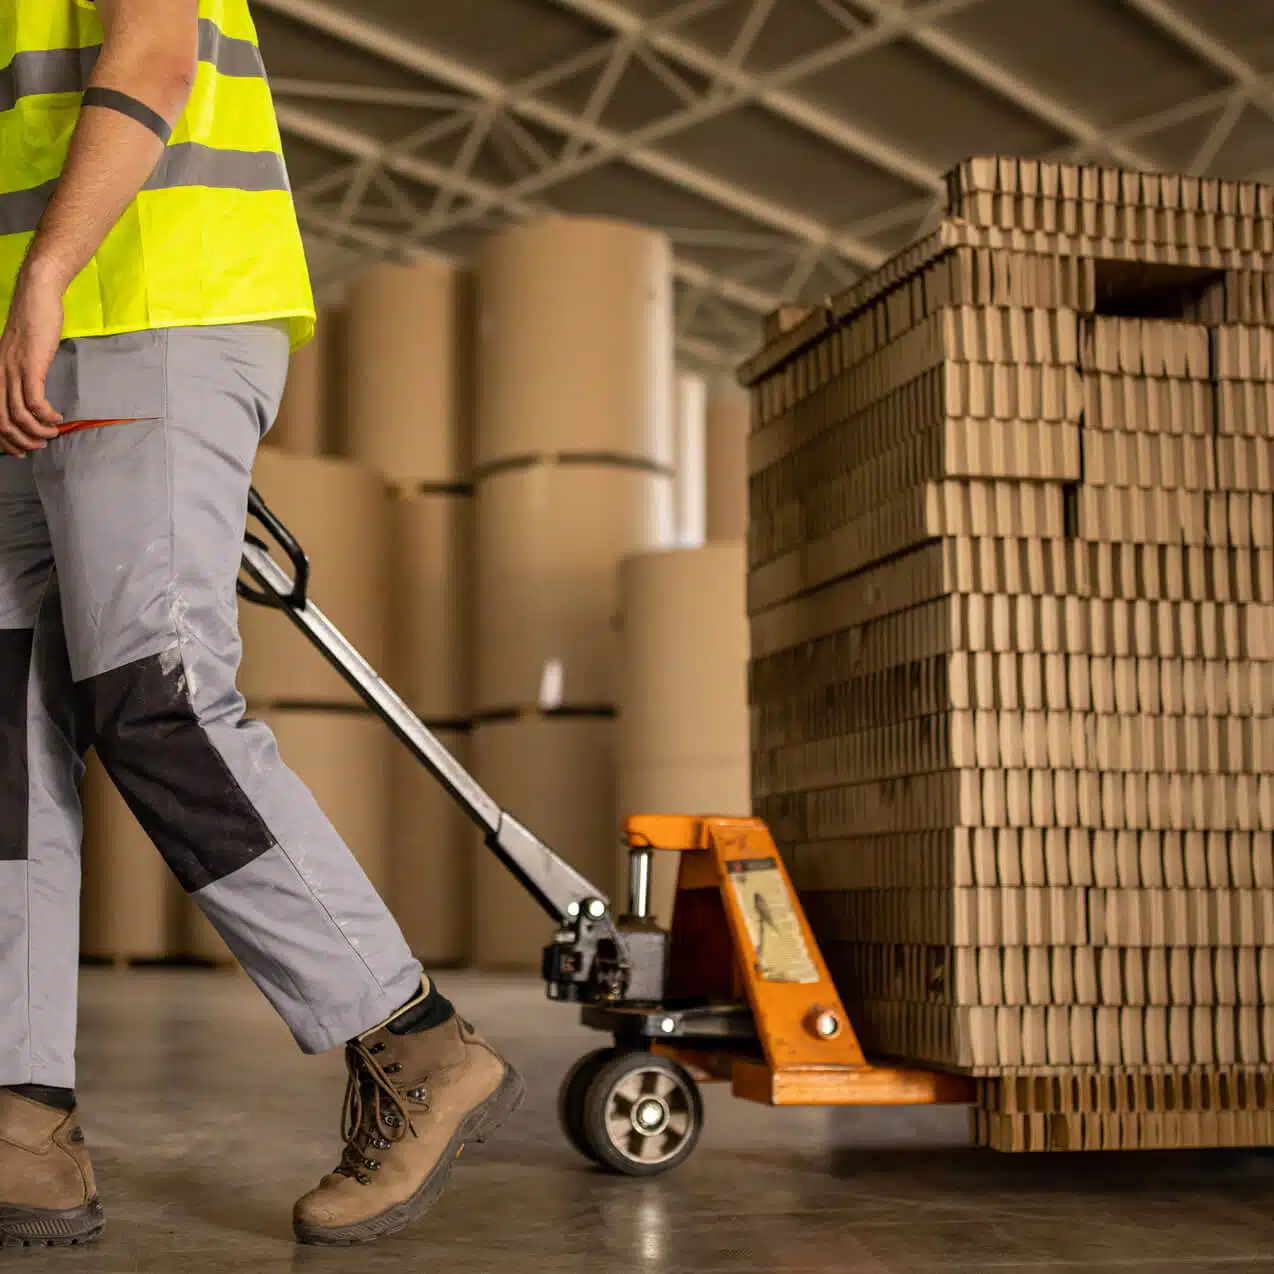 zensmart is showing A worker in a high-visibility yellow vest and gray pants uses a manual pallet jack to move a stack of cardboard boxes adorned with labels in a warehouse. Large rolls of material can be seen in the background amidst industrial surroundings. with print workflow automation